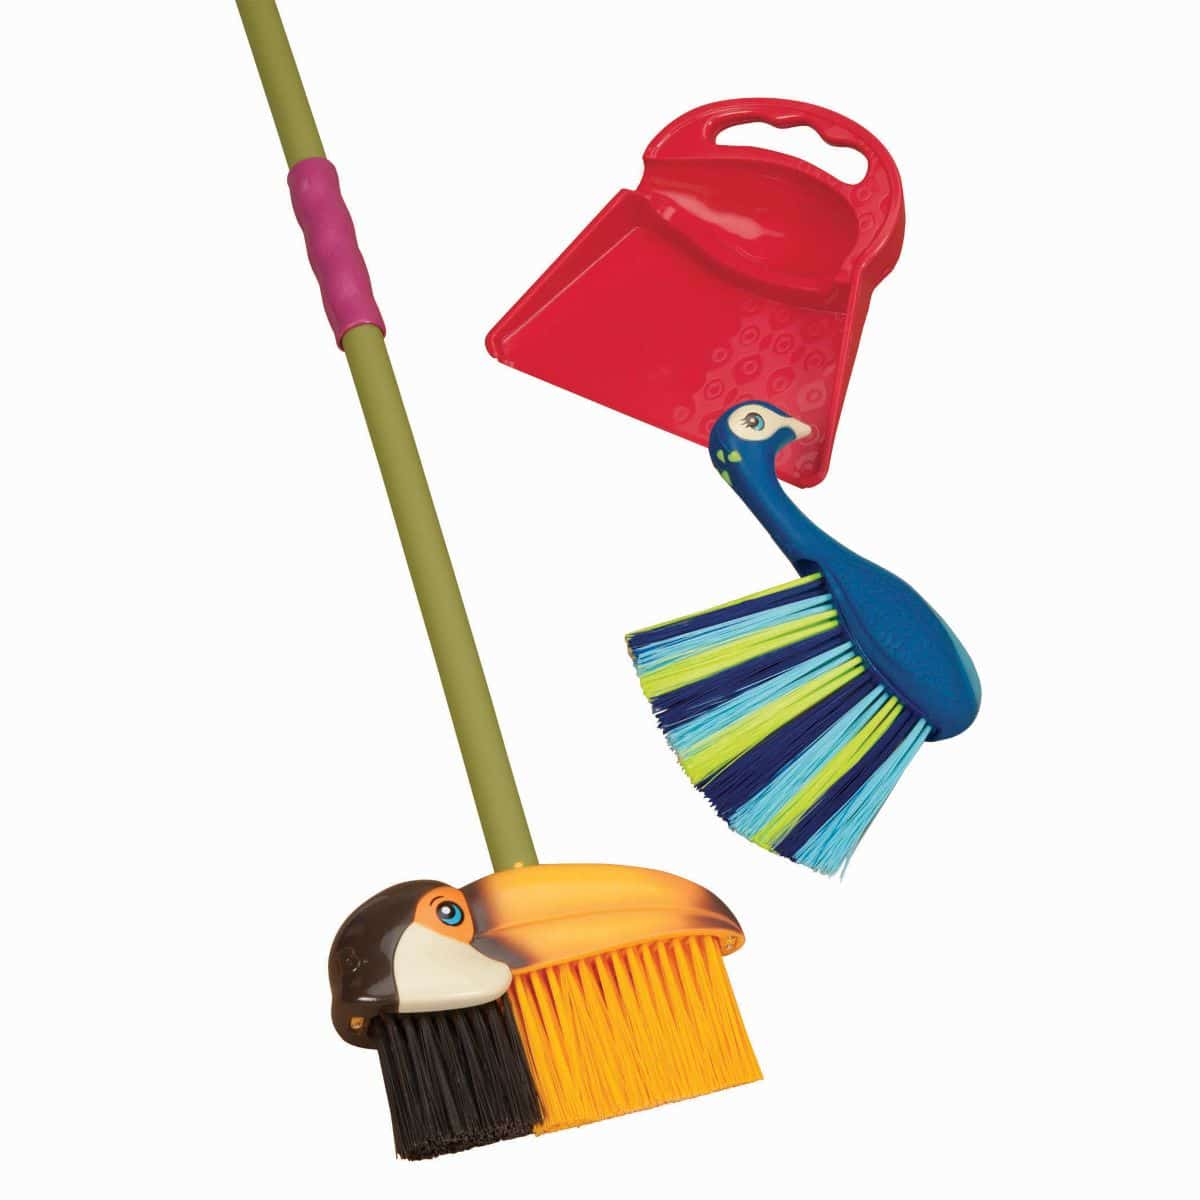 Tropicleania, Toy Cleaning Set